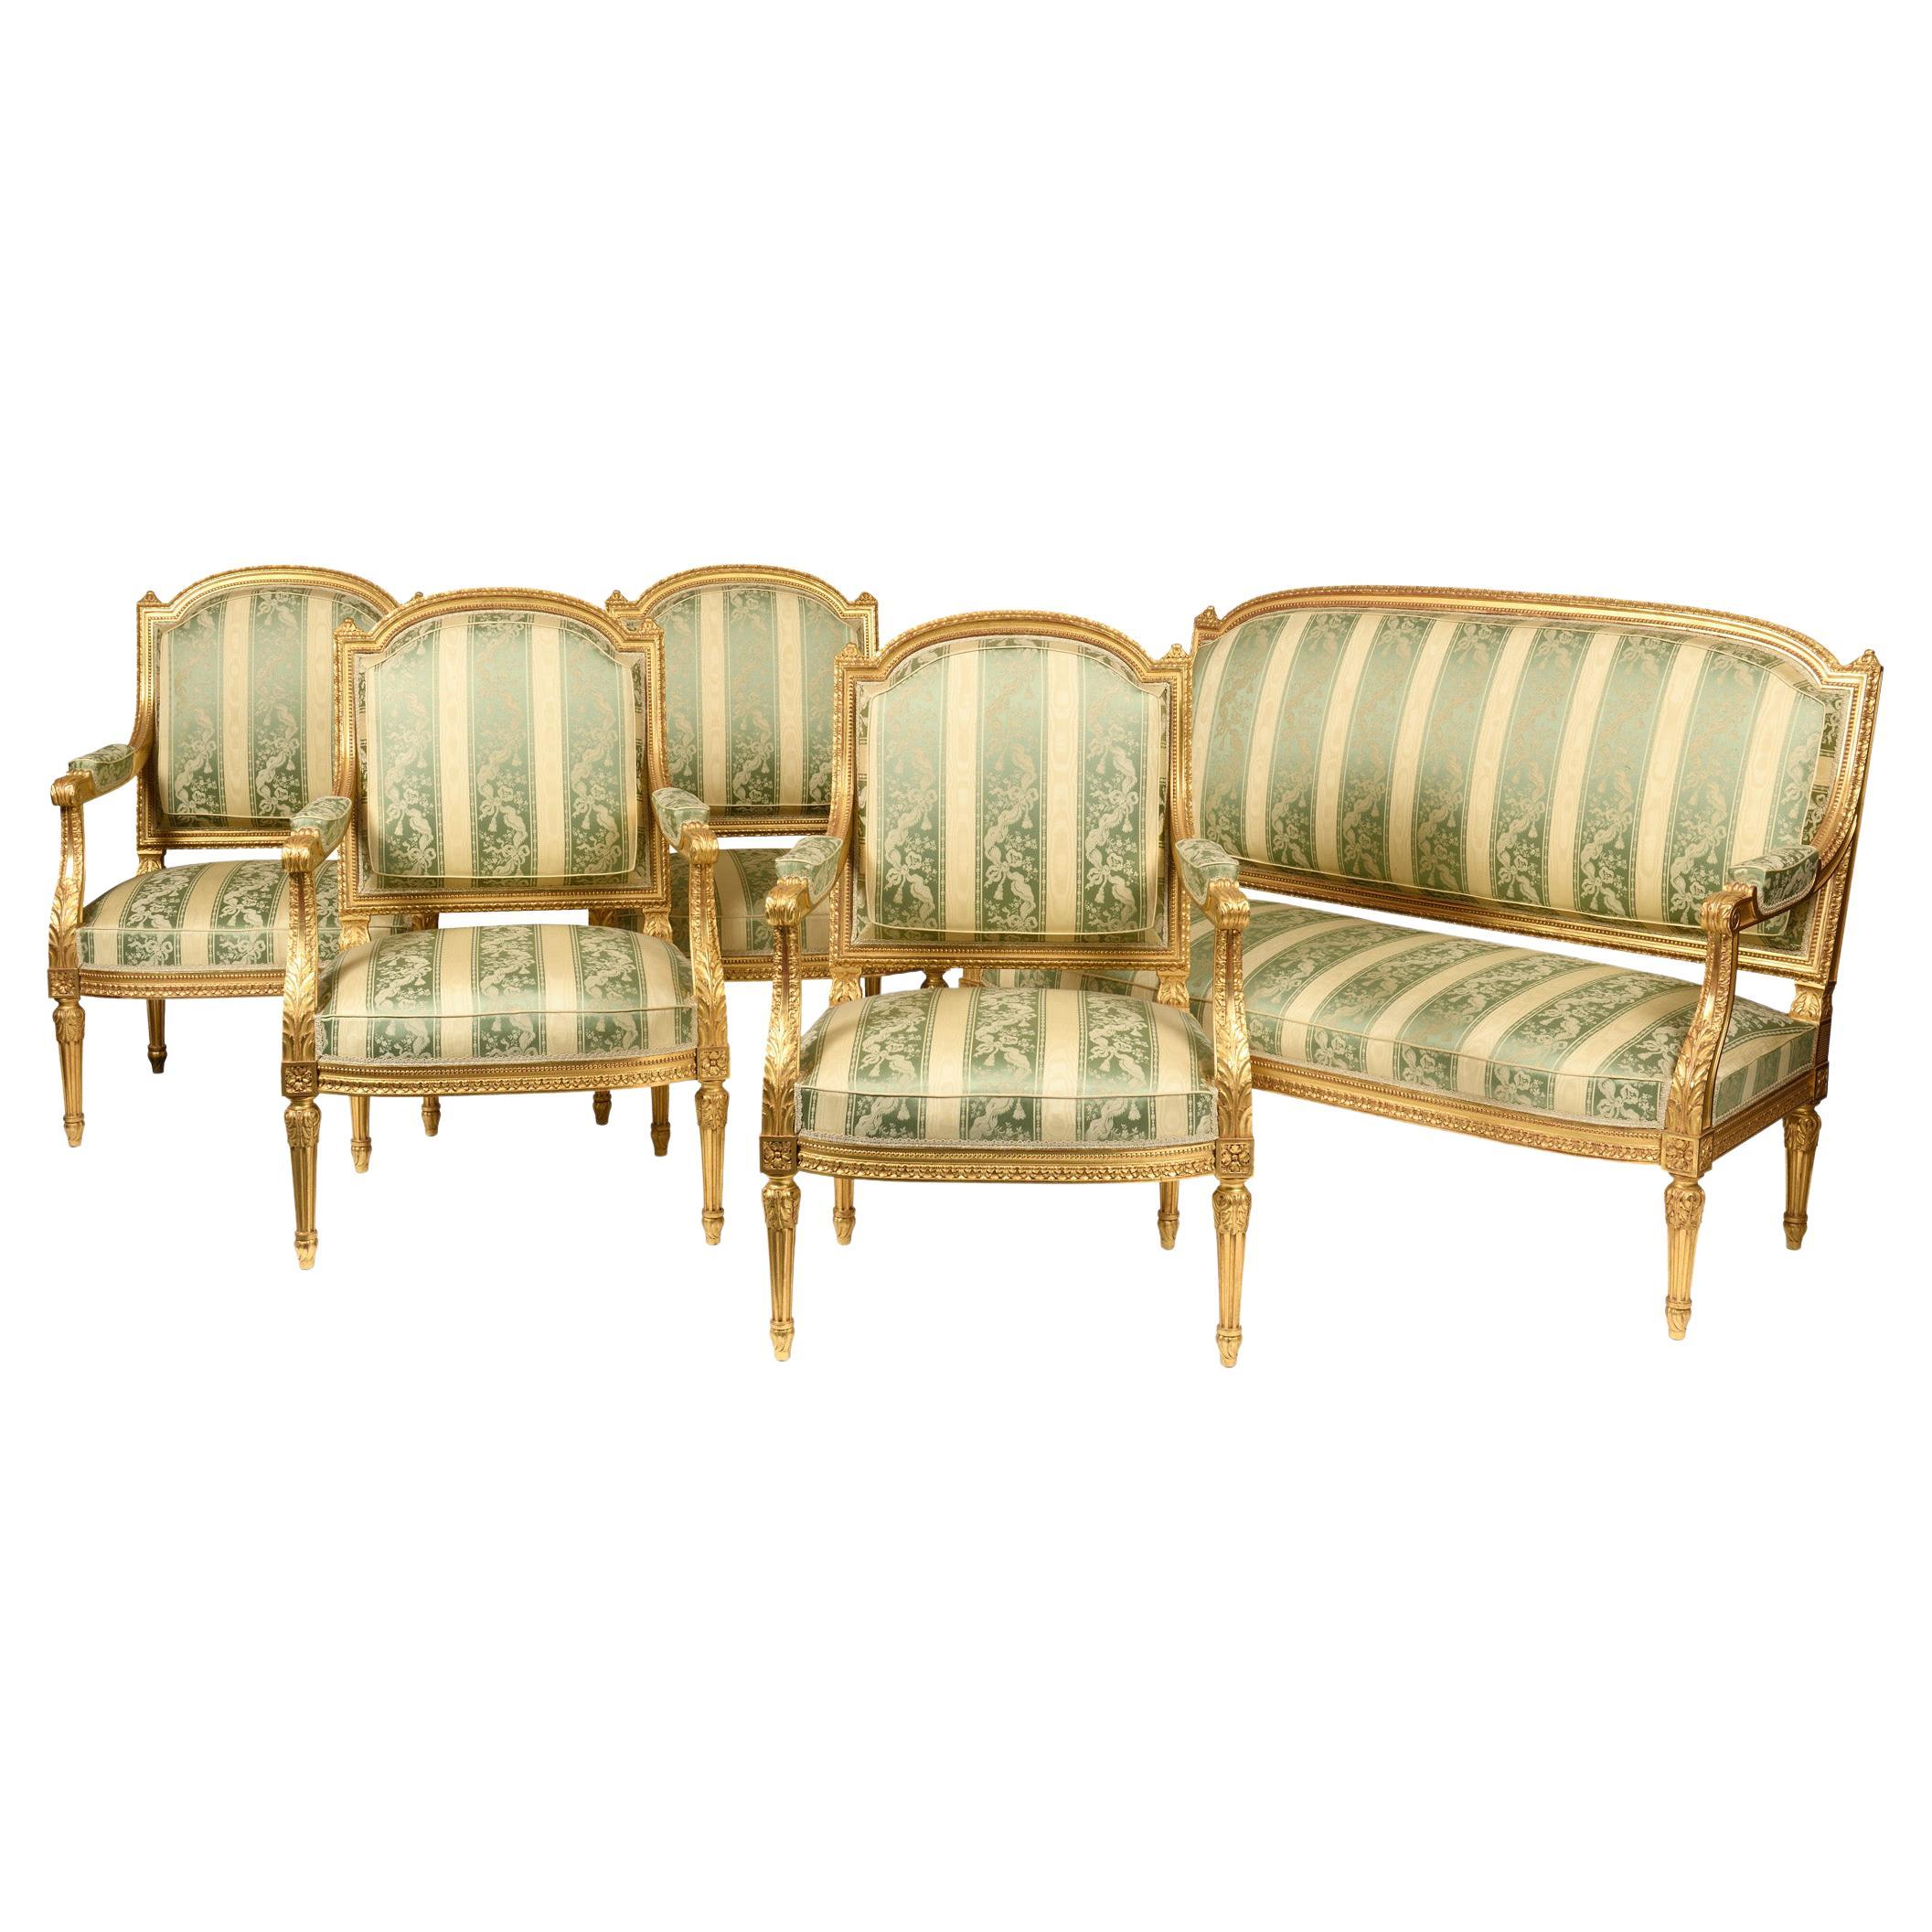 Salon Set Comprising One Sofa and 4 Armchairs Giltwood Louis XVI Style For Sale